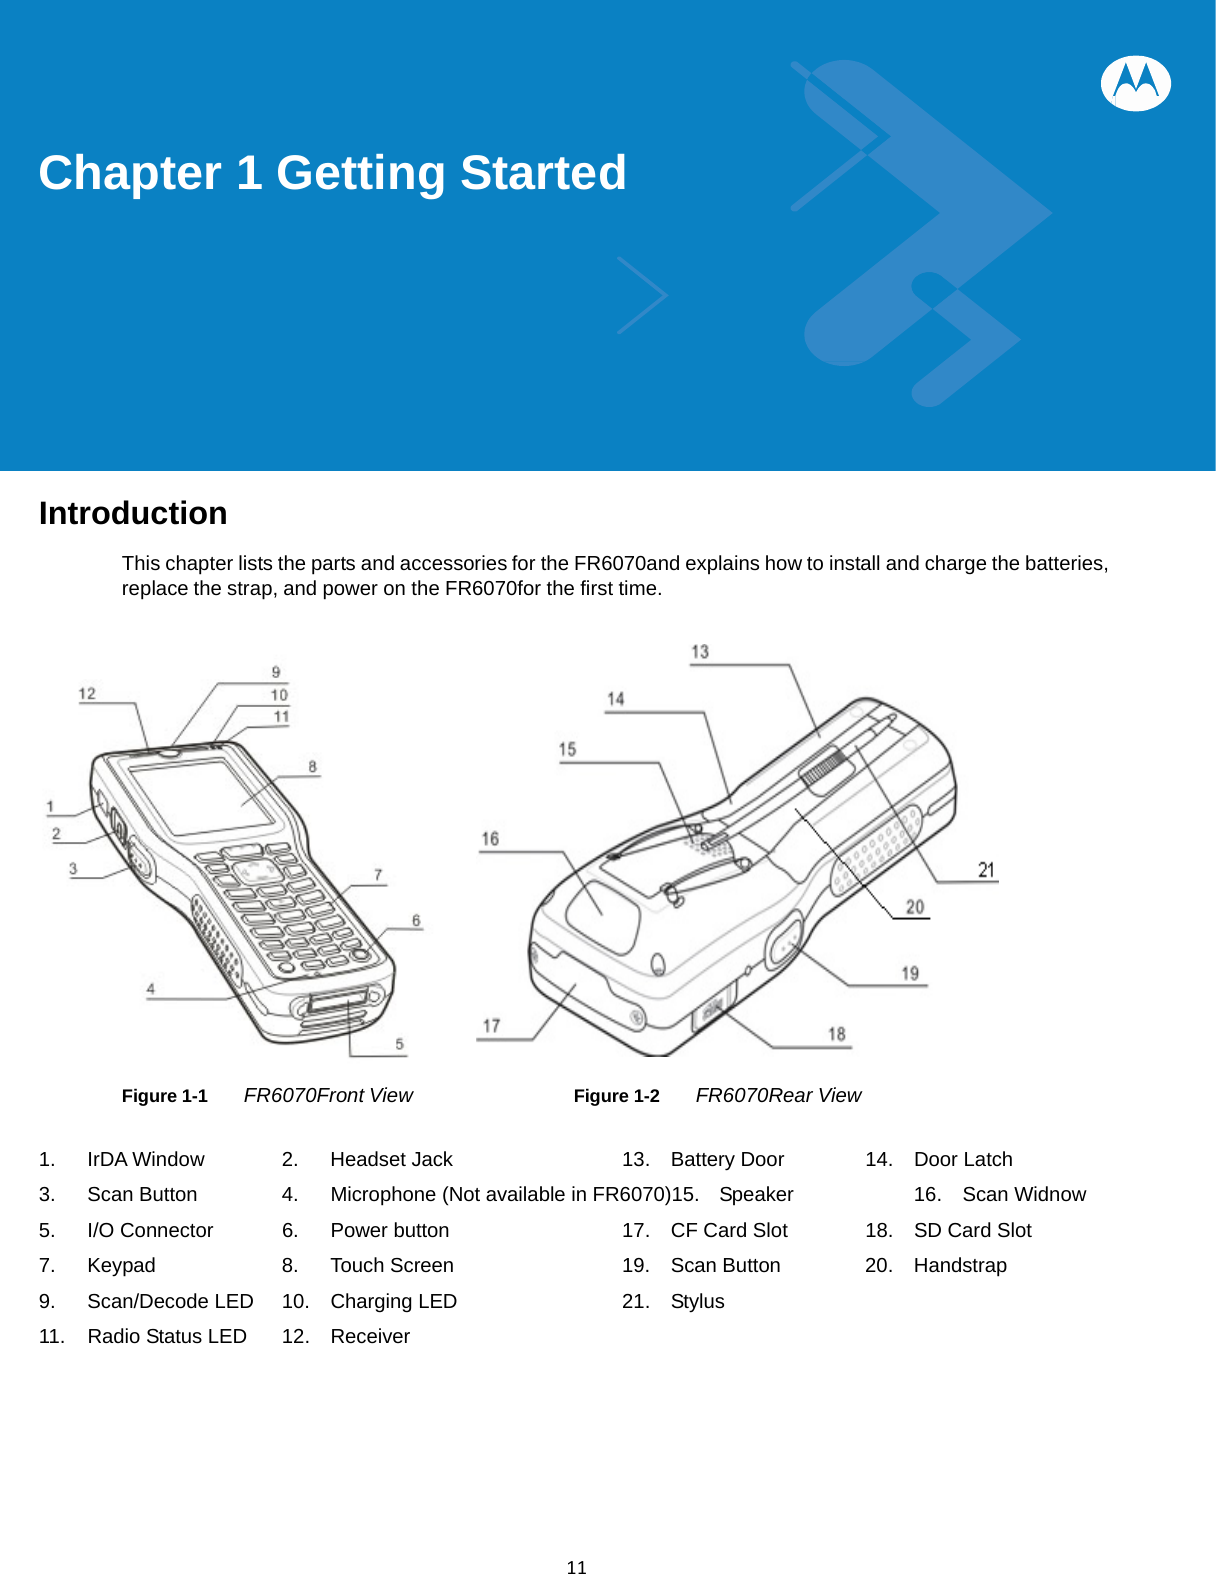  11Chapter 1 Getting Started            Introduction  This chapter lists the parts and accessories for the FR6070and explains how to install and charge the batteries, replace the strap, and power on the FR6070for the first time.                                            Figure 1-1      FR6070Front View    Figure 1-2    FR6070Rear View   1.  IrDA Window     2.  Headset Jack              13.  Battery Door     14.  Door Latch 3.  Scan Button        4.  Microphone (Not available in FR6070)15.  Speaker        16.  Scan Widnow   5. I/O Connector   6. Power button    17. CF Card Slot  18. SD Card Slot 7.  Keypad          8.  Touch Screen        19.  Scan Button     20.  Handstrap  9. Scan/Decode LED   10. Charging LED    21. Stylus     11. Radio Status LED 12.  Receiver                      